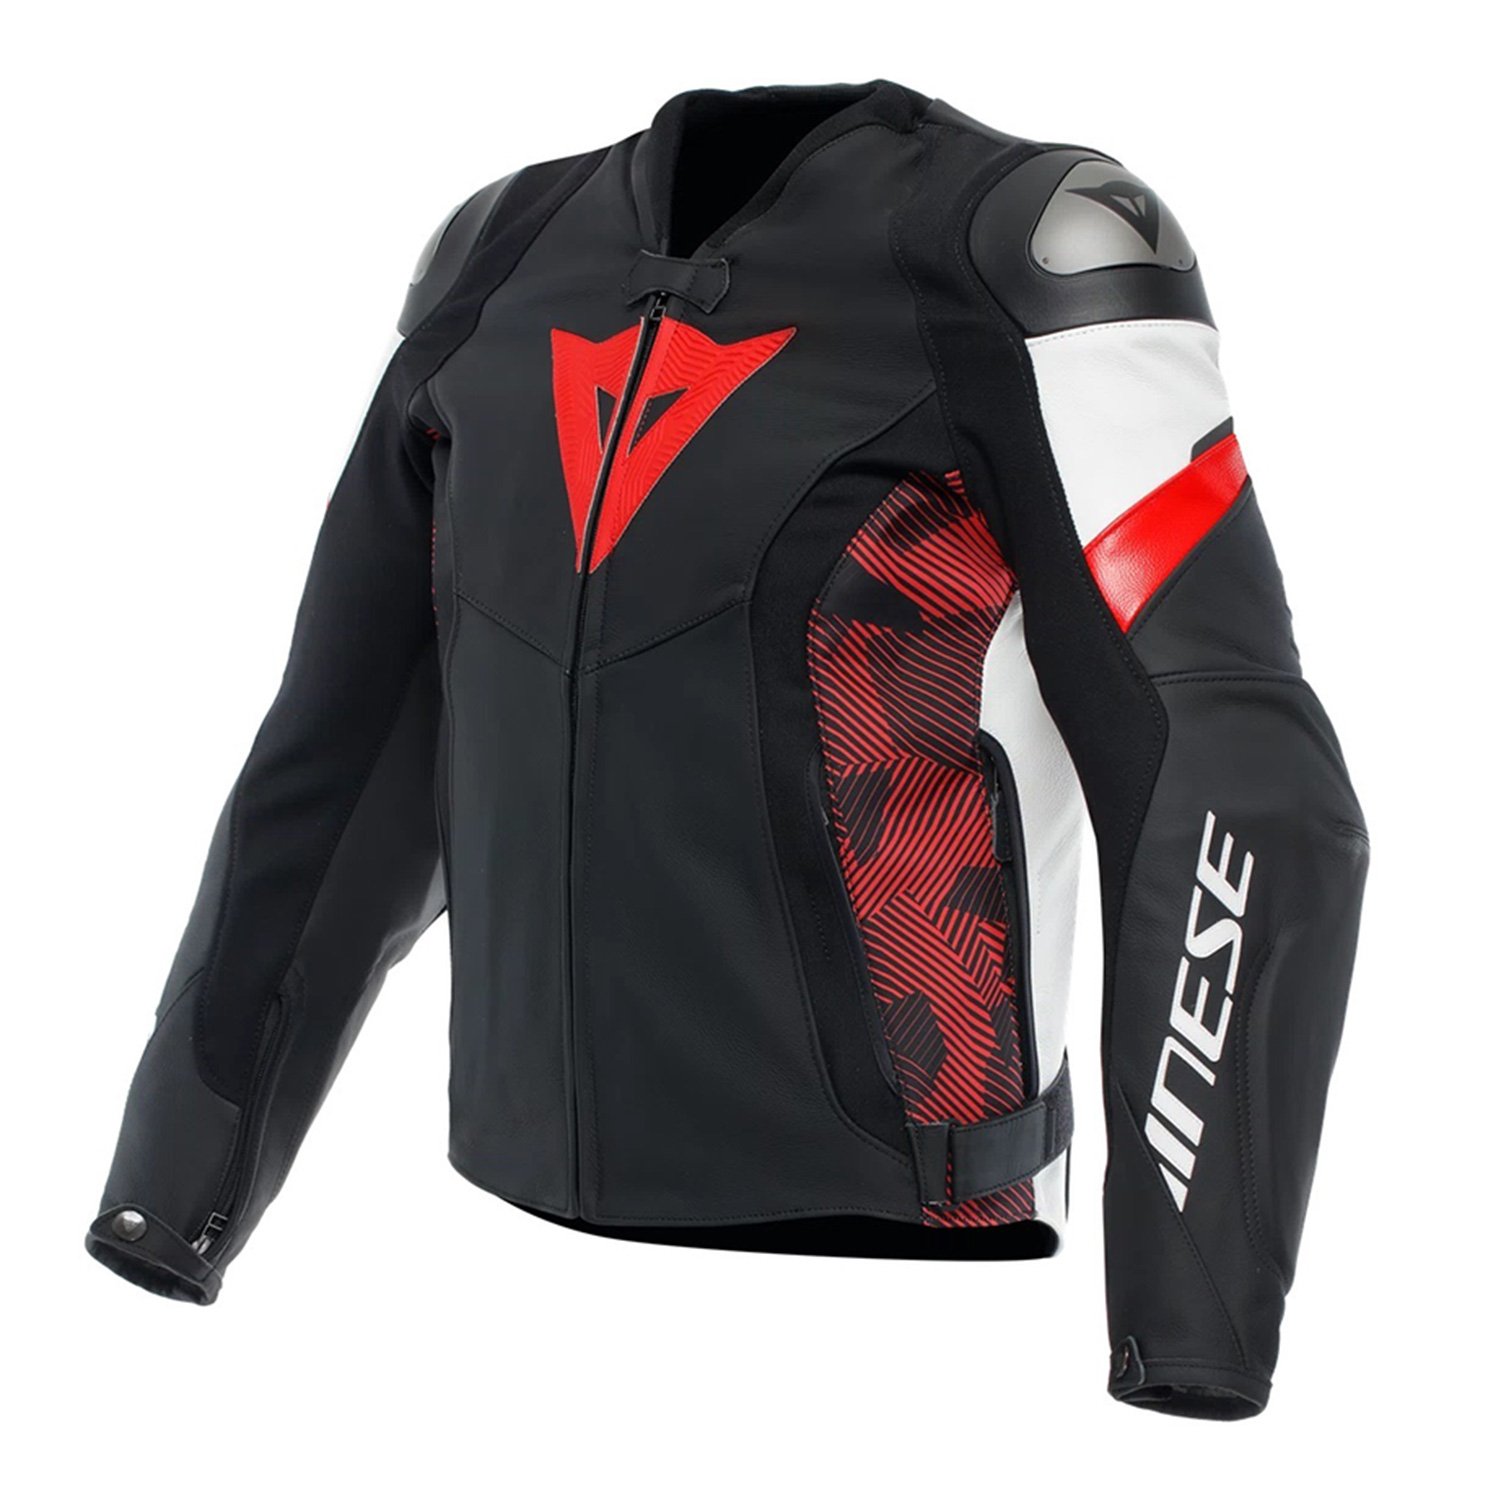 Image of Dainese Avro Leather 5 Jacket Black Red Lava White Size 46 EN